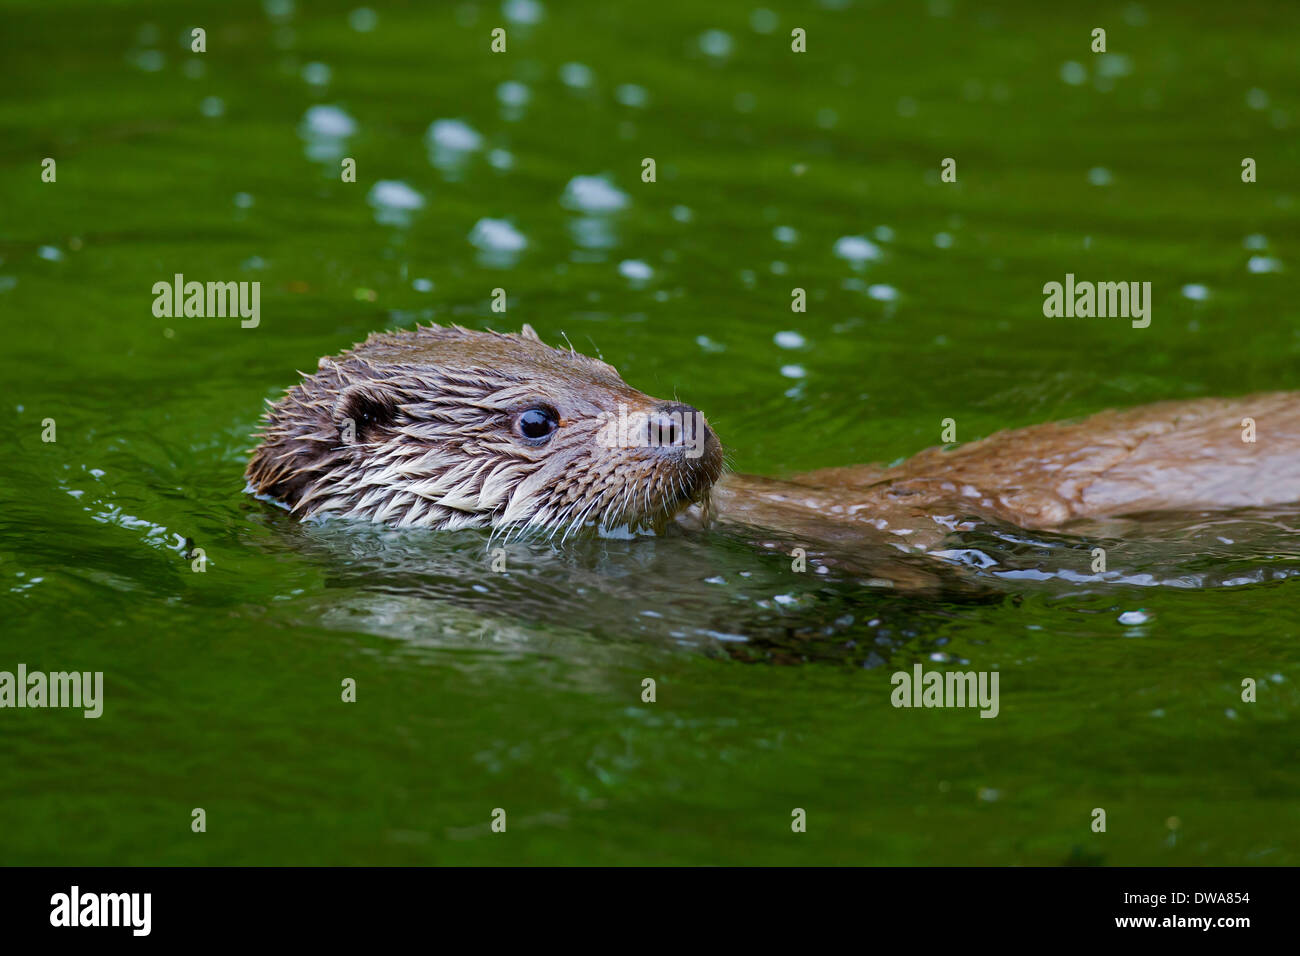 European River Otter (Lutra lutra) swimming on its back in stream Stock Photo